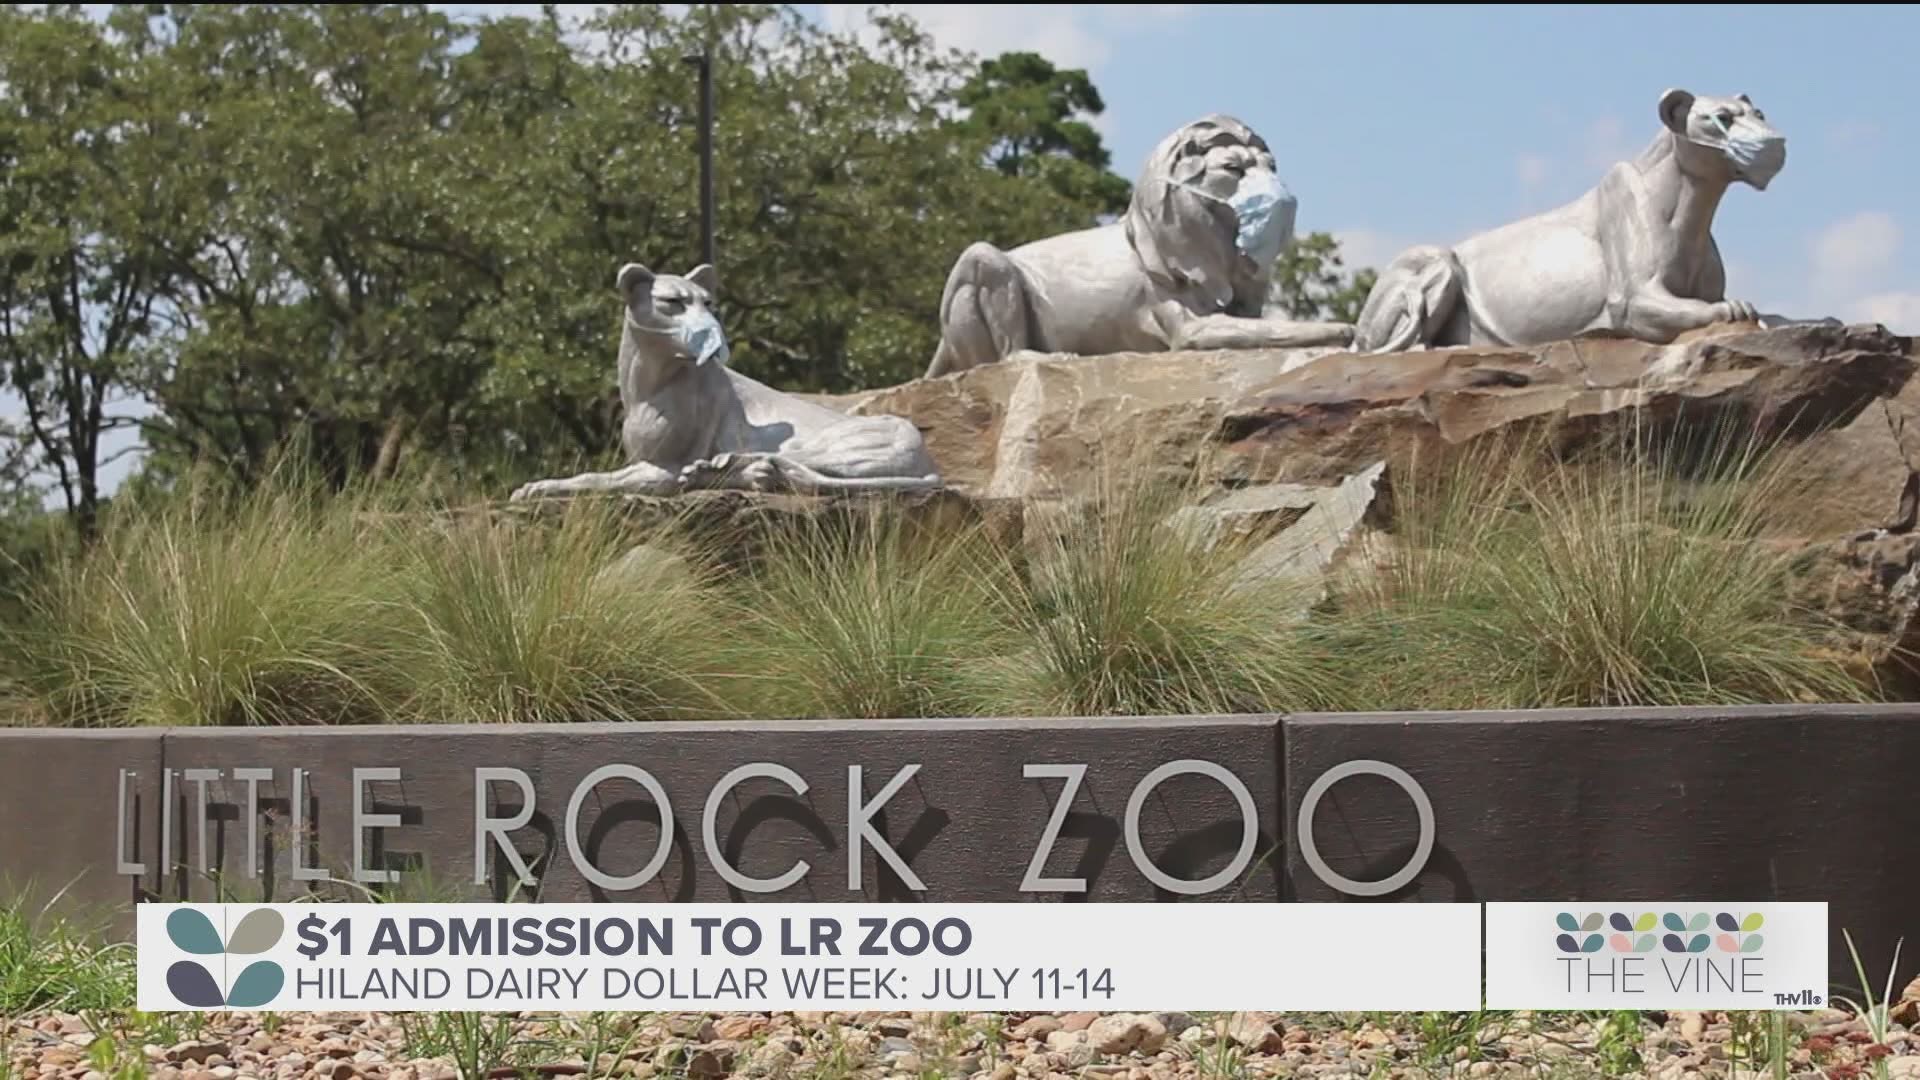 There are quite a few upcoming events to put on your radar, including the Little Rock Zoo’s Hiland Dairy Dollar Week, the Arkansas State Fair and more.